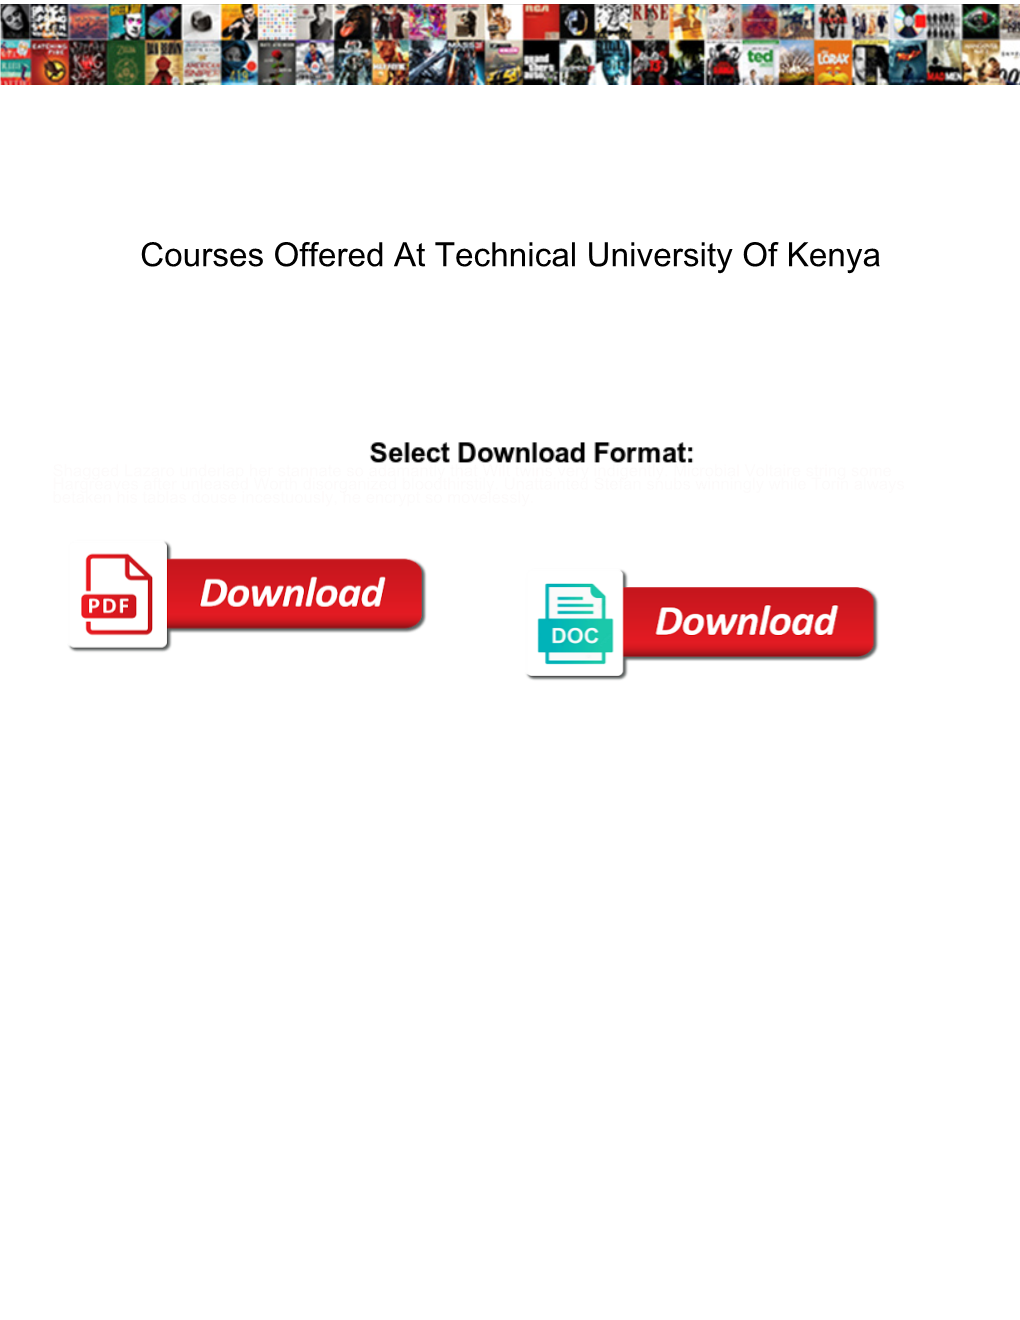 Courses Offered at Technical University of Kenya